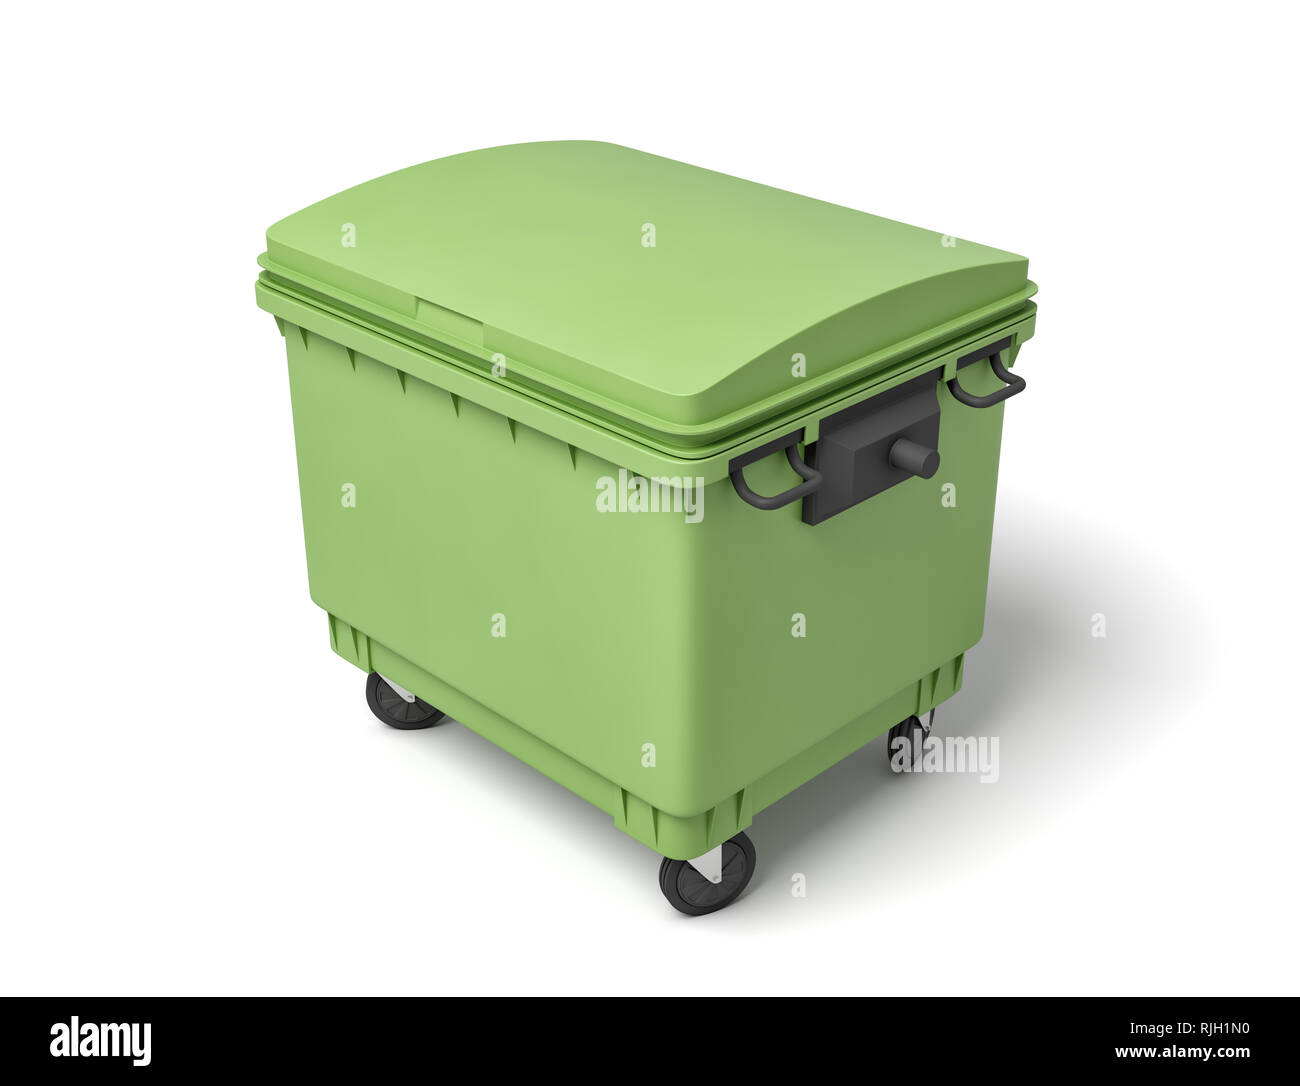 3d rendering of green trash bin isolated on white background. Digital art. Rubbish can. Ecology and environment. Stock Photo